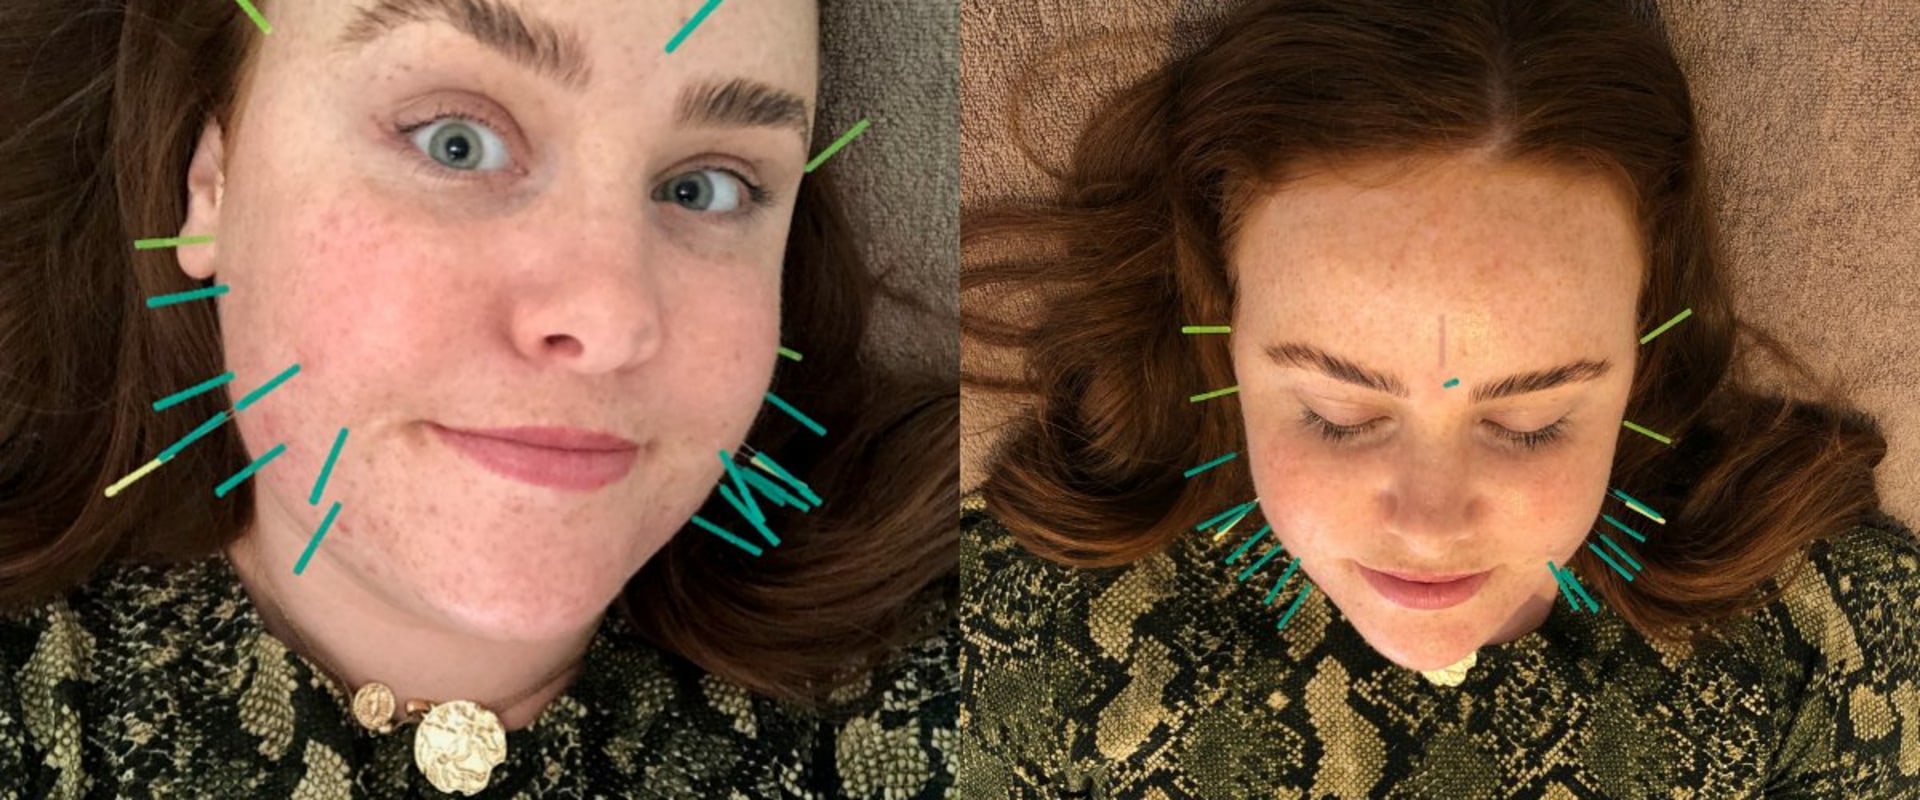 How Long Does it Take to See Results from Acupuncture Treatment?